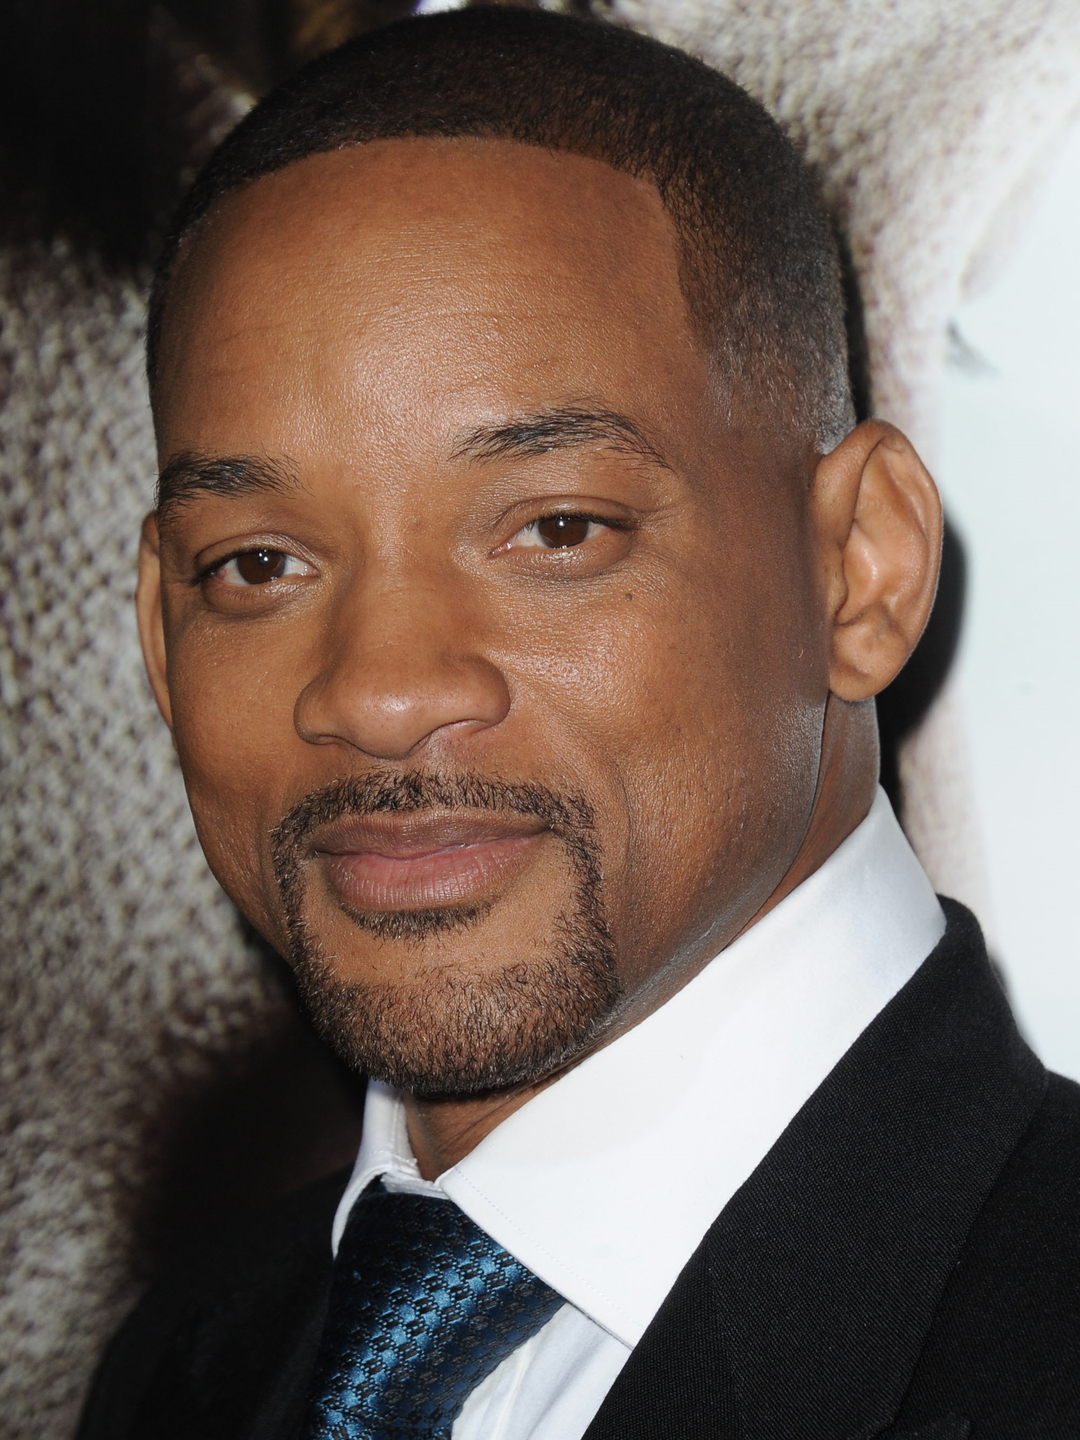 Will Smith who are his parents